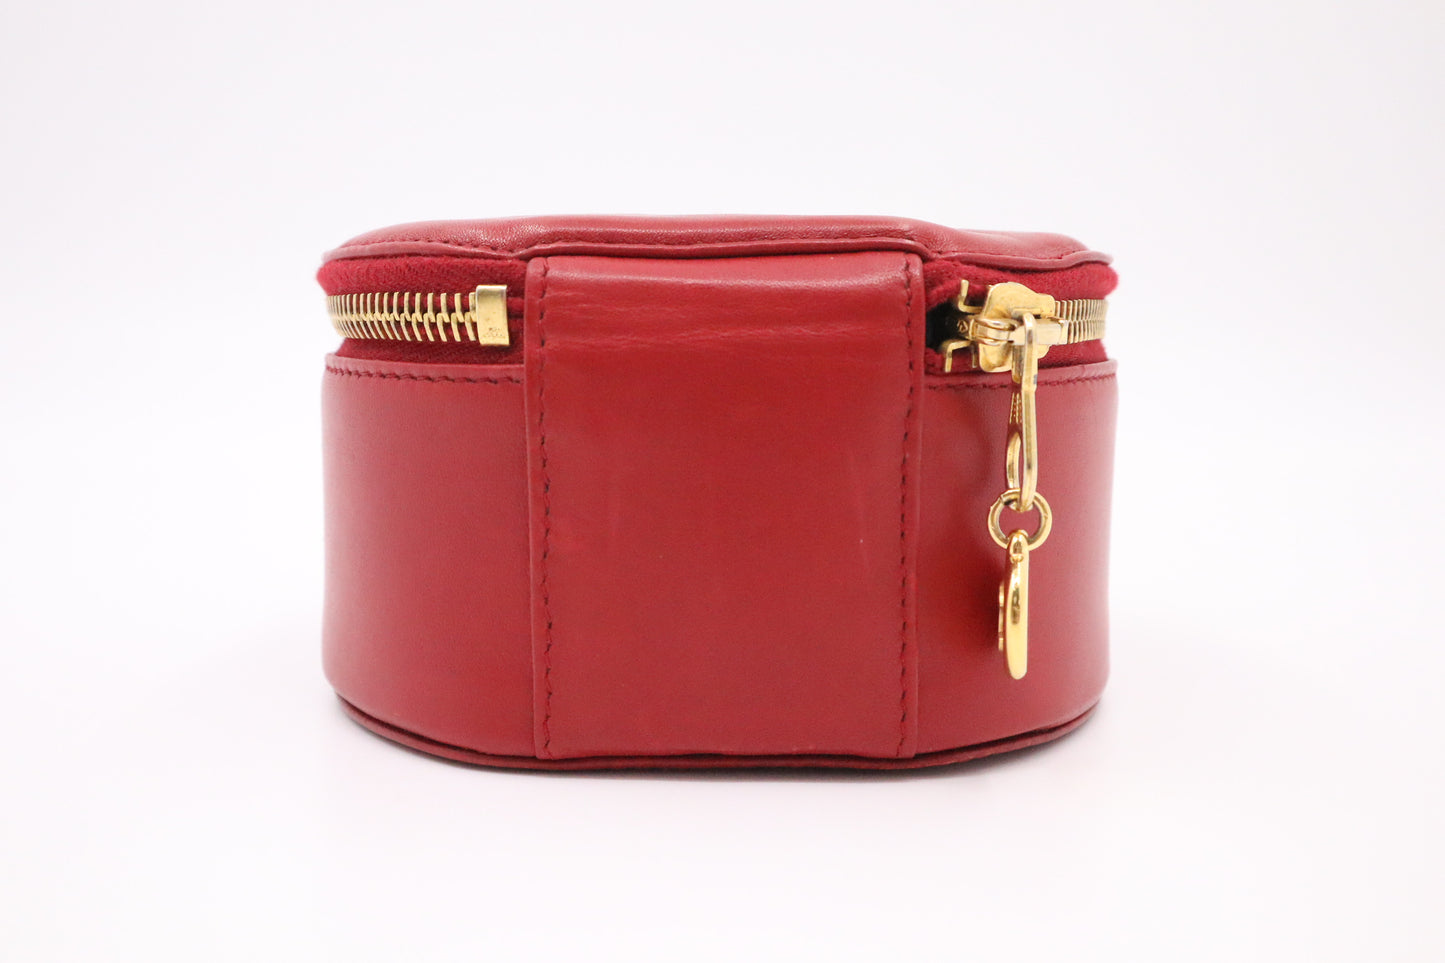 Chanel Round Vanity Case in Red Leather